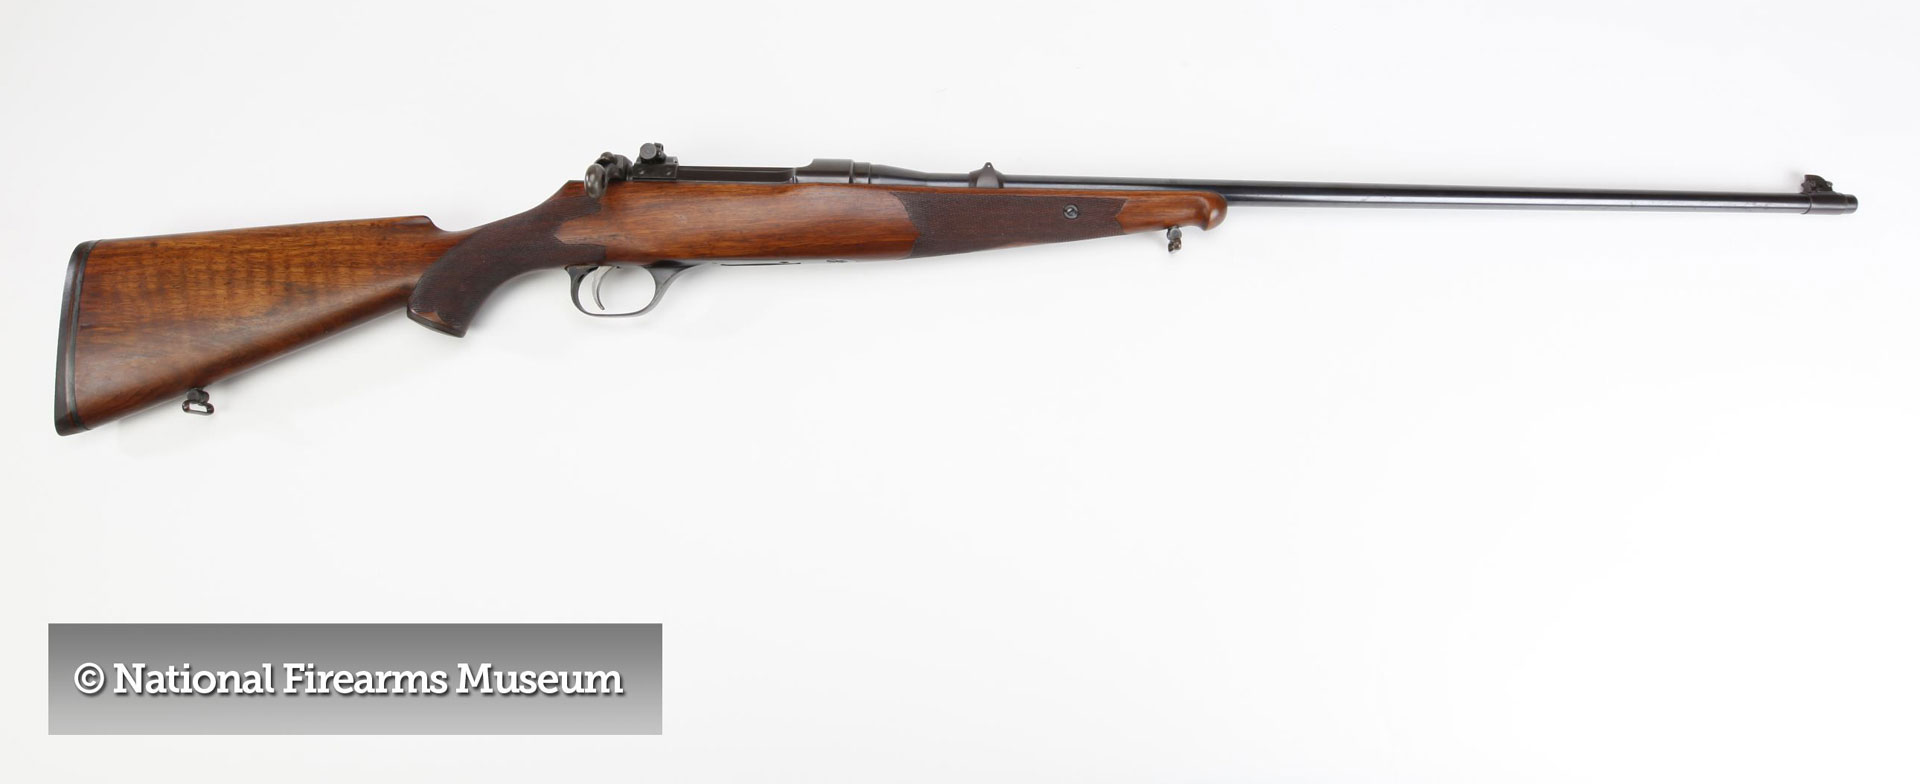 The Straight-Pull Rifle: From Past To Present